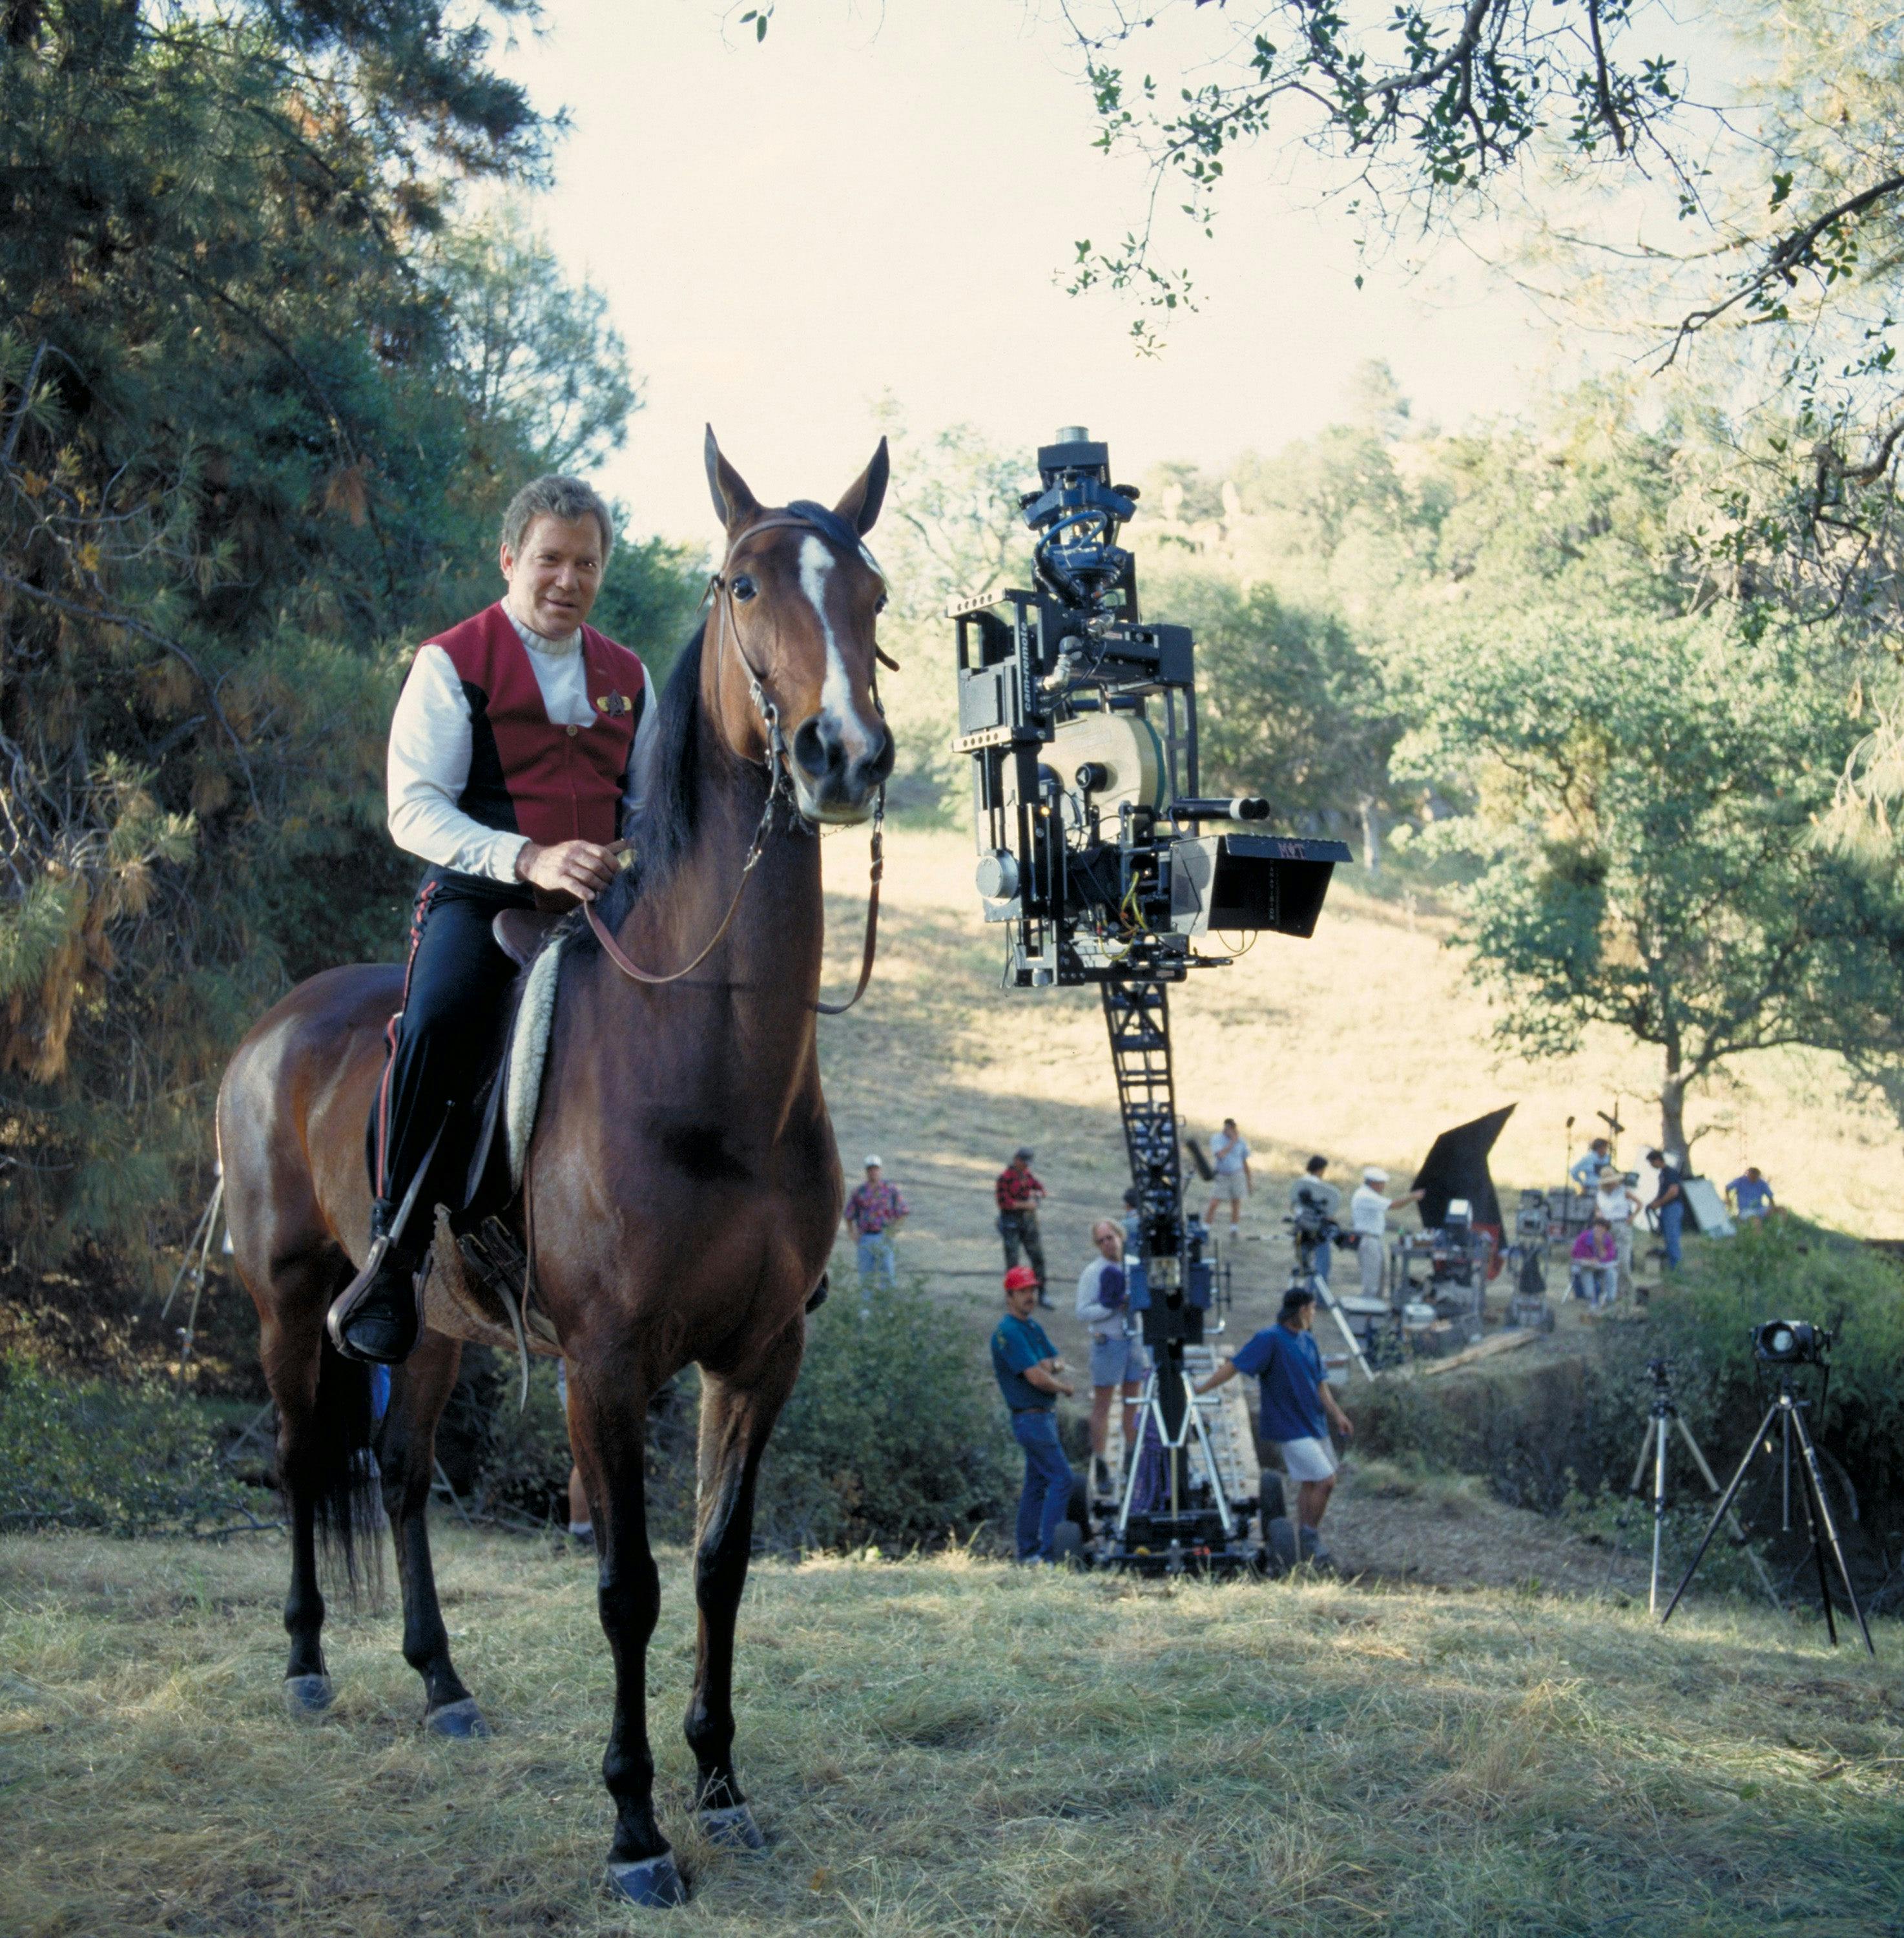 William Shatner on a horse (left) with camera and crew behind them, on set of Generations